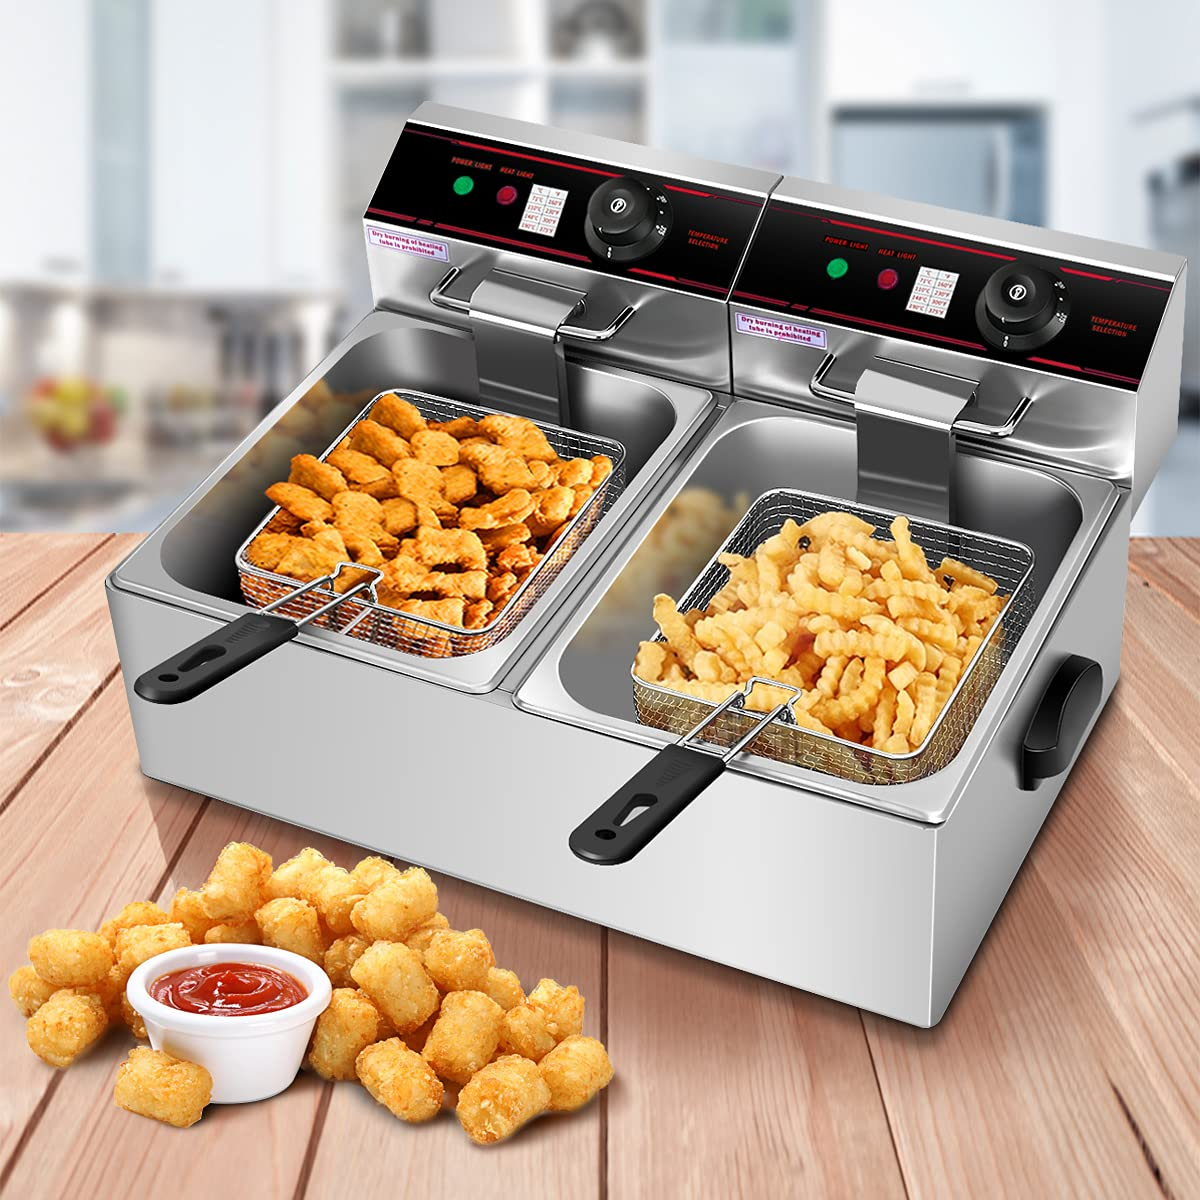 Giantex 3400W Commercial Deep Fryer Dual Tank, 12.8QT Stainless Steel Electric Deep Fryer with 2 Baskets